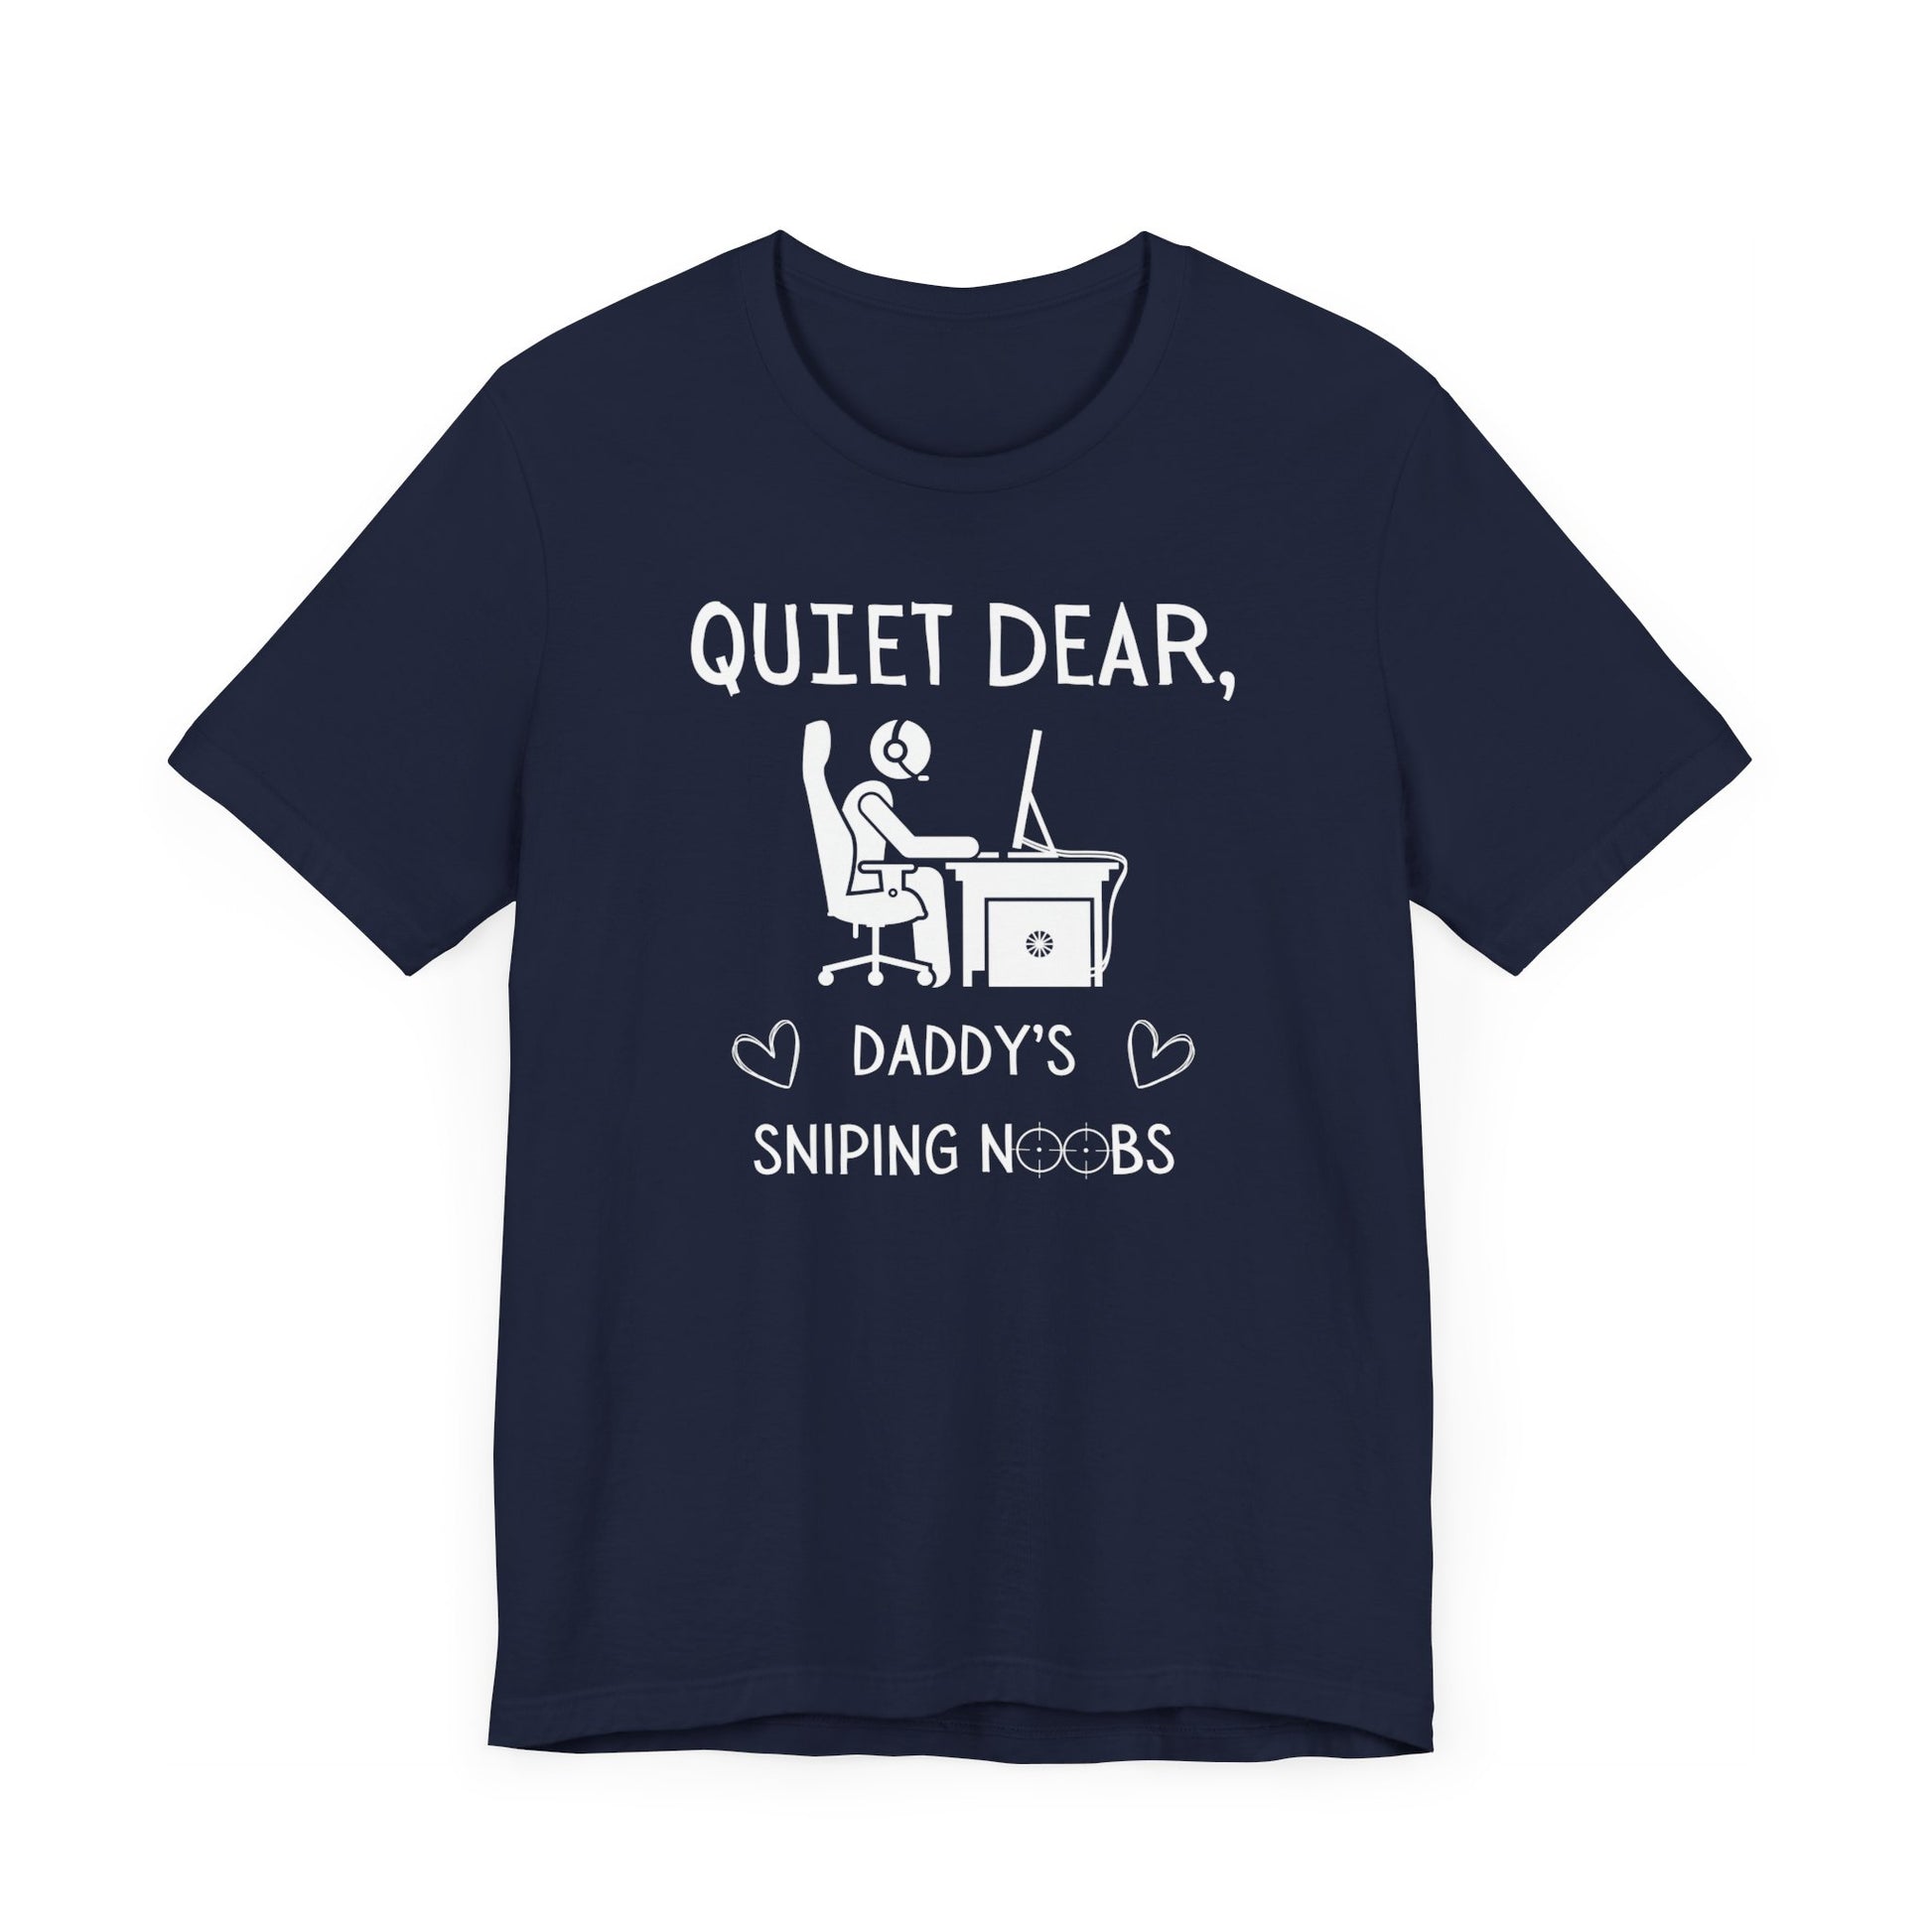 A flat image of a navy t-shirt that reads Quiet Dear, Daddy's Sniping Noobs in white text. The lower text is framed by two hearts, and the O's are in the shape of sniper scopes. In the center of the shirt is an image of a person at a desk with a gaming PC.